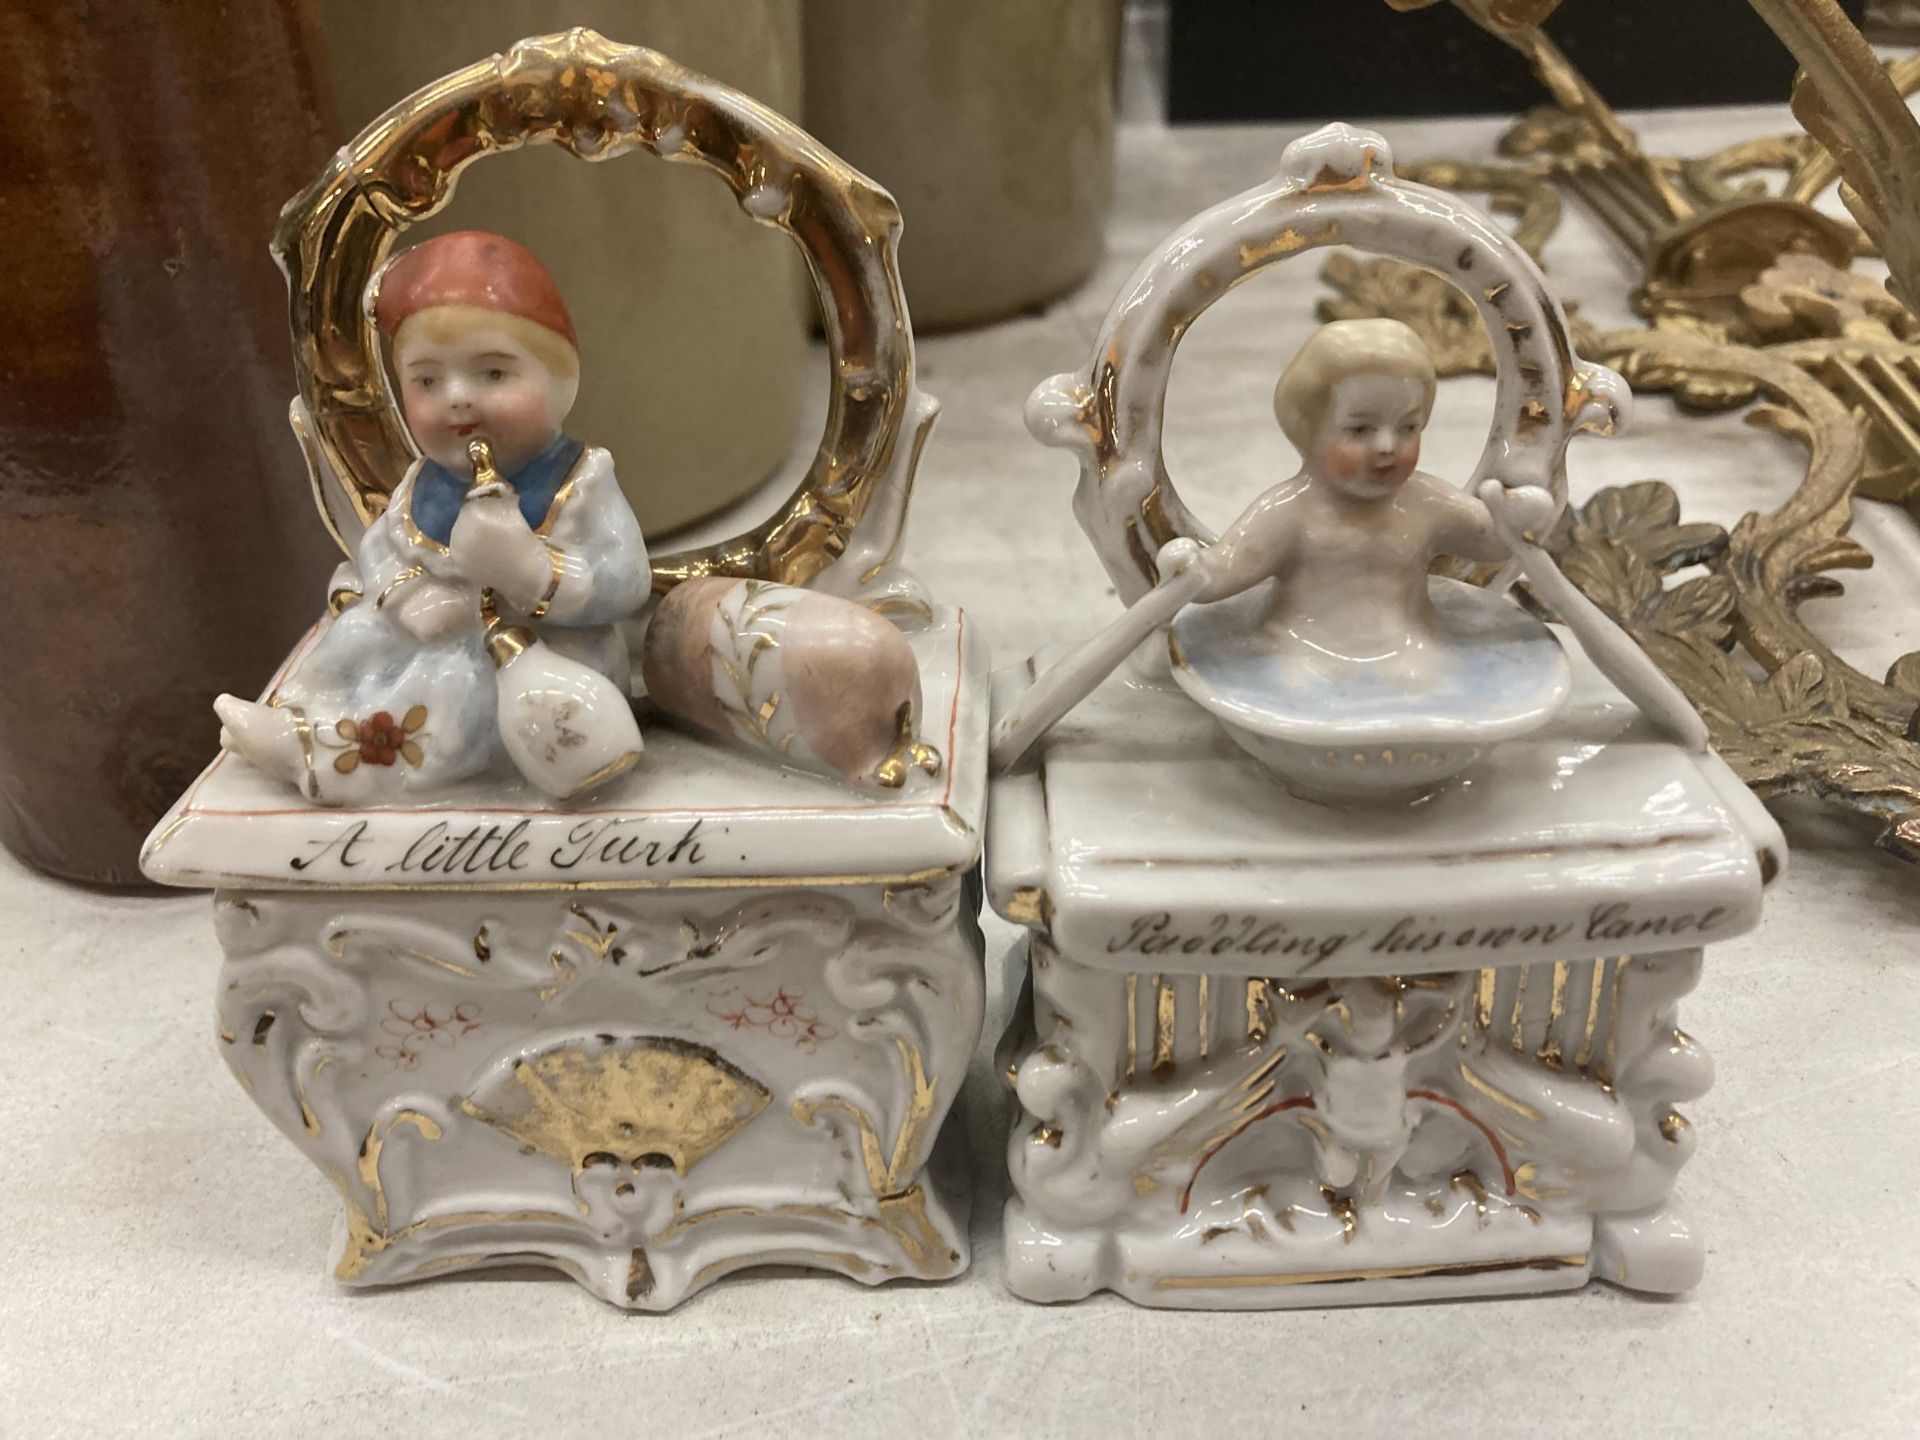 TWO VINTAGE GERMAN FAIRINGS TRINKET BOXES, TO INCLUDE 'A LITTLE TURK' - RESTORED AND 'PADDLING HIS